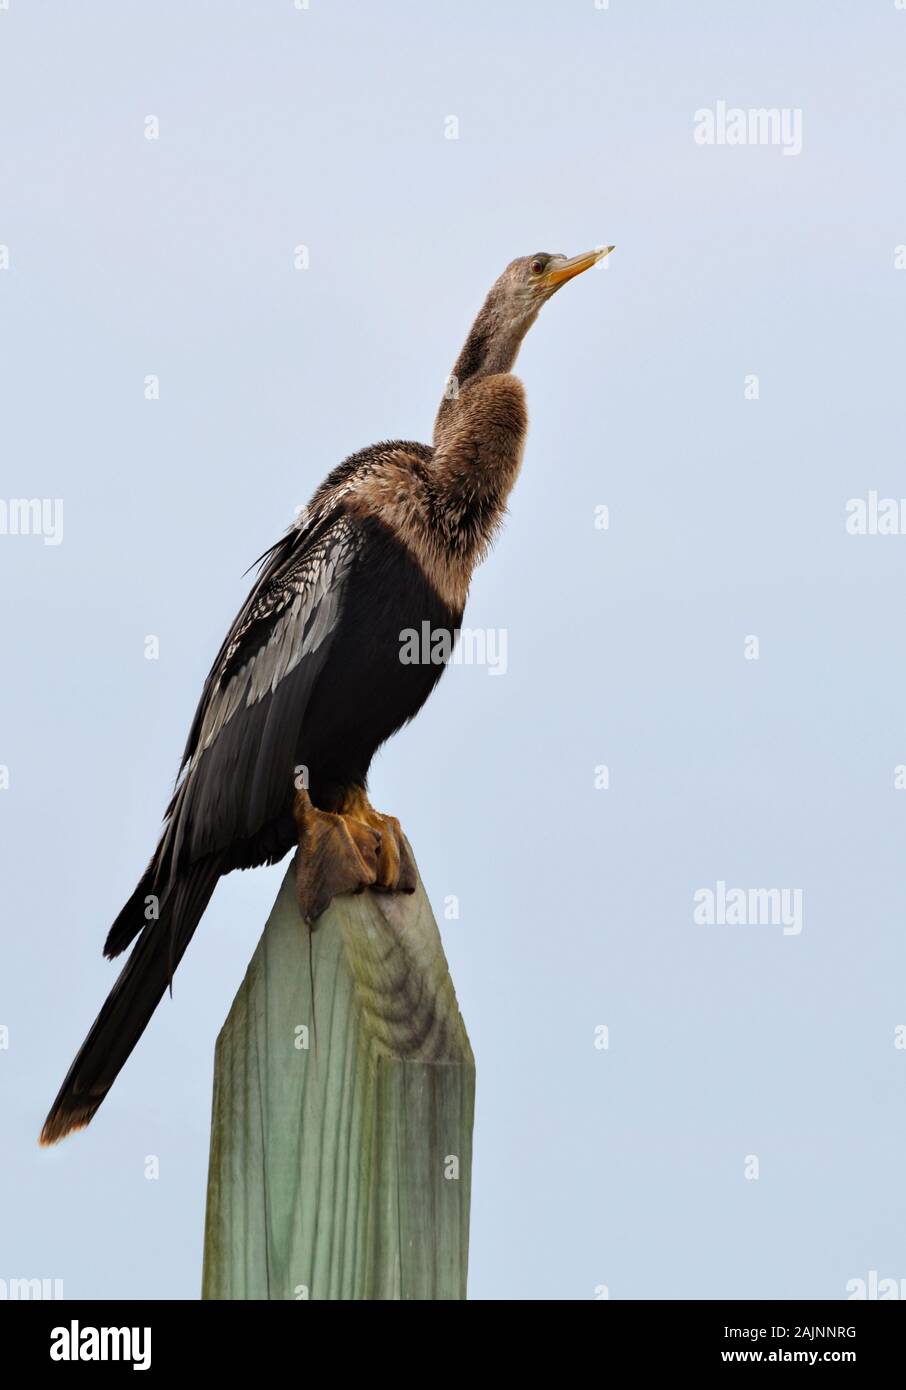 Anhinga, also known as snakebird or darter, perched on a post Stock Photo